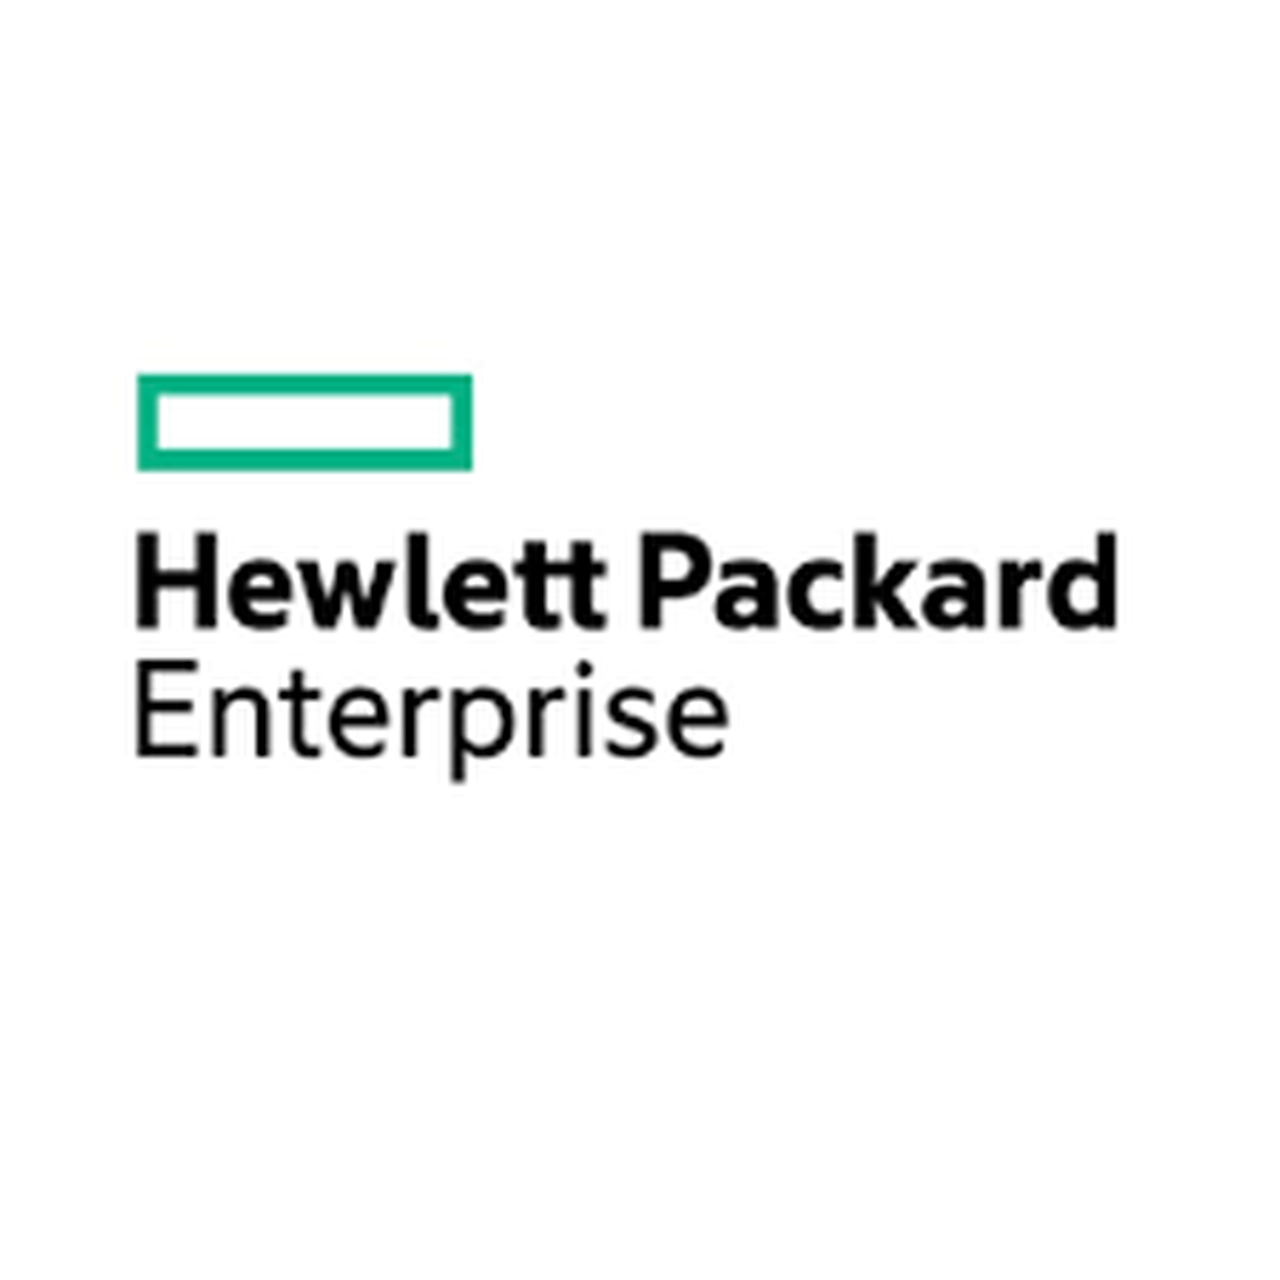 HPE DL380 Gen10 XeonS 4216 Reman FIO Kit (HSSL Sourcing) - HPE Discontinued Product)